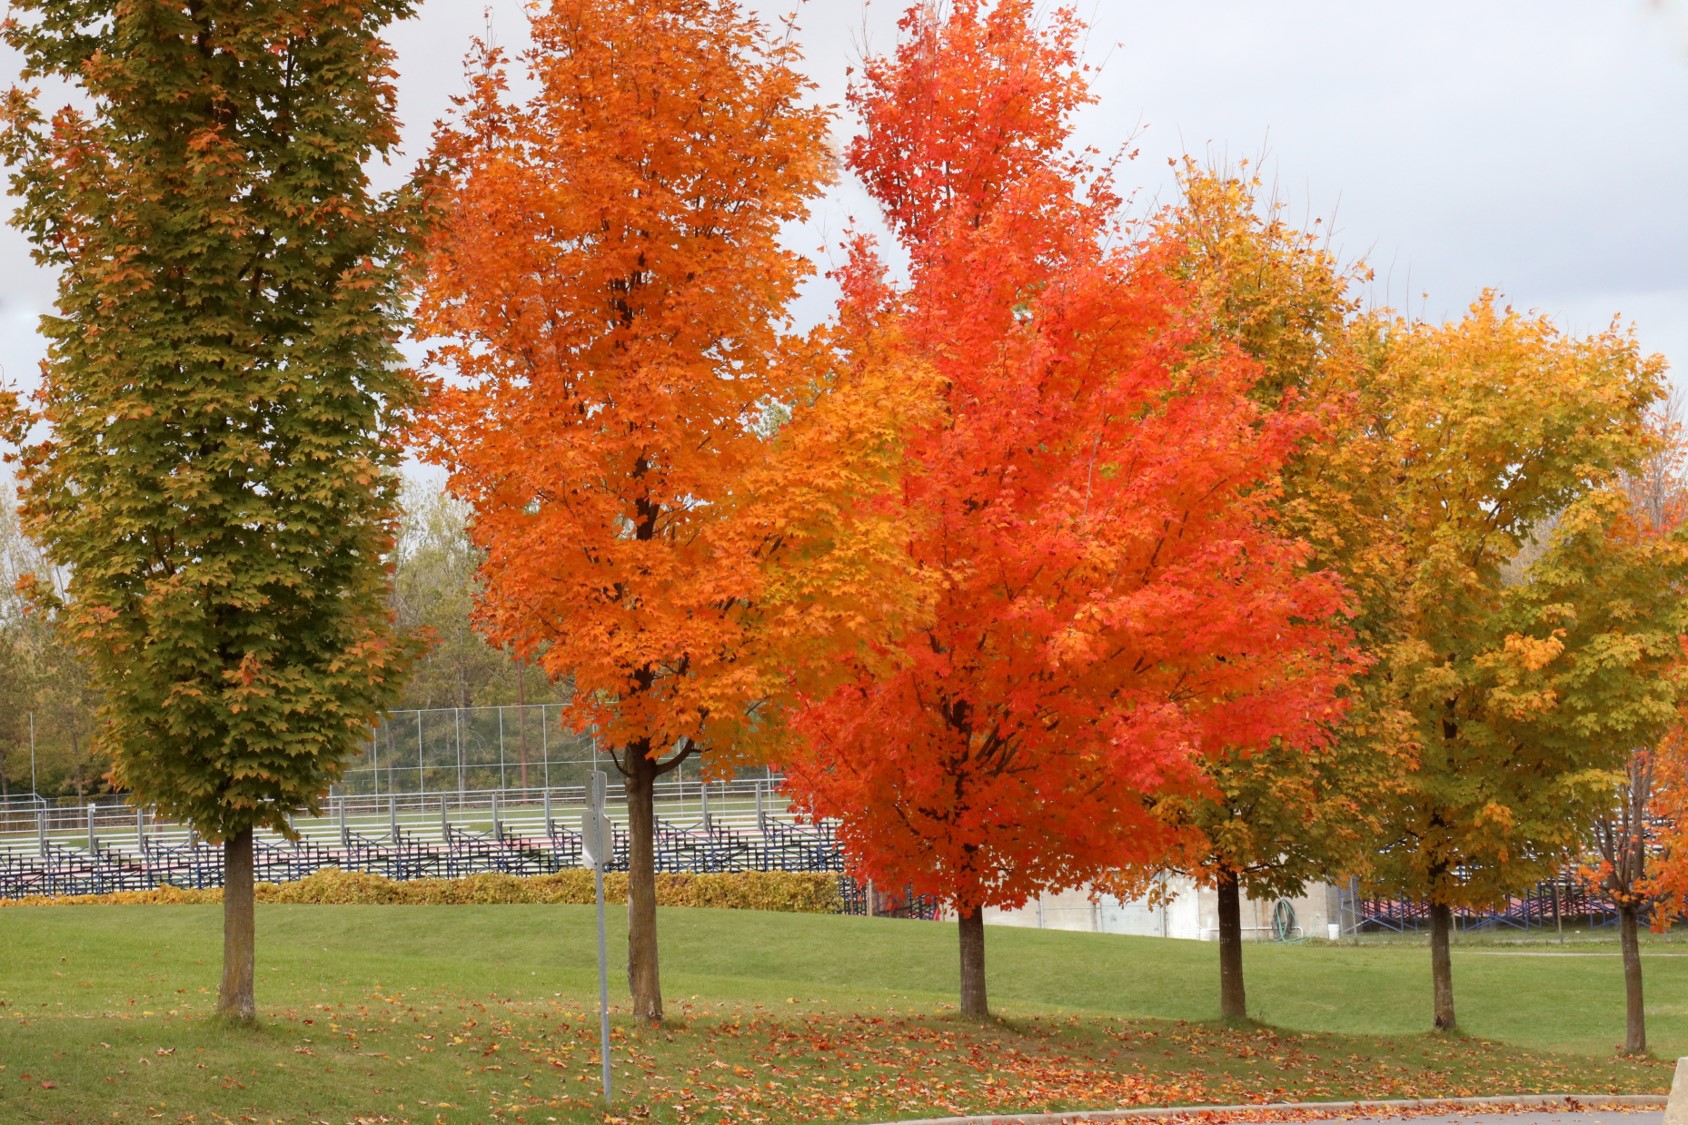 A picture of colorful trees with changing leaves in the fall. Proper training in digital photography can produce this type of vibrant picture.